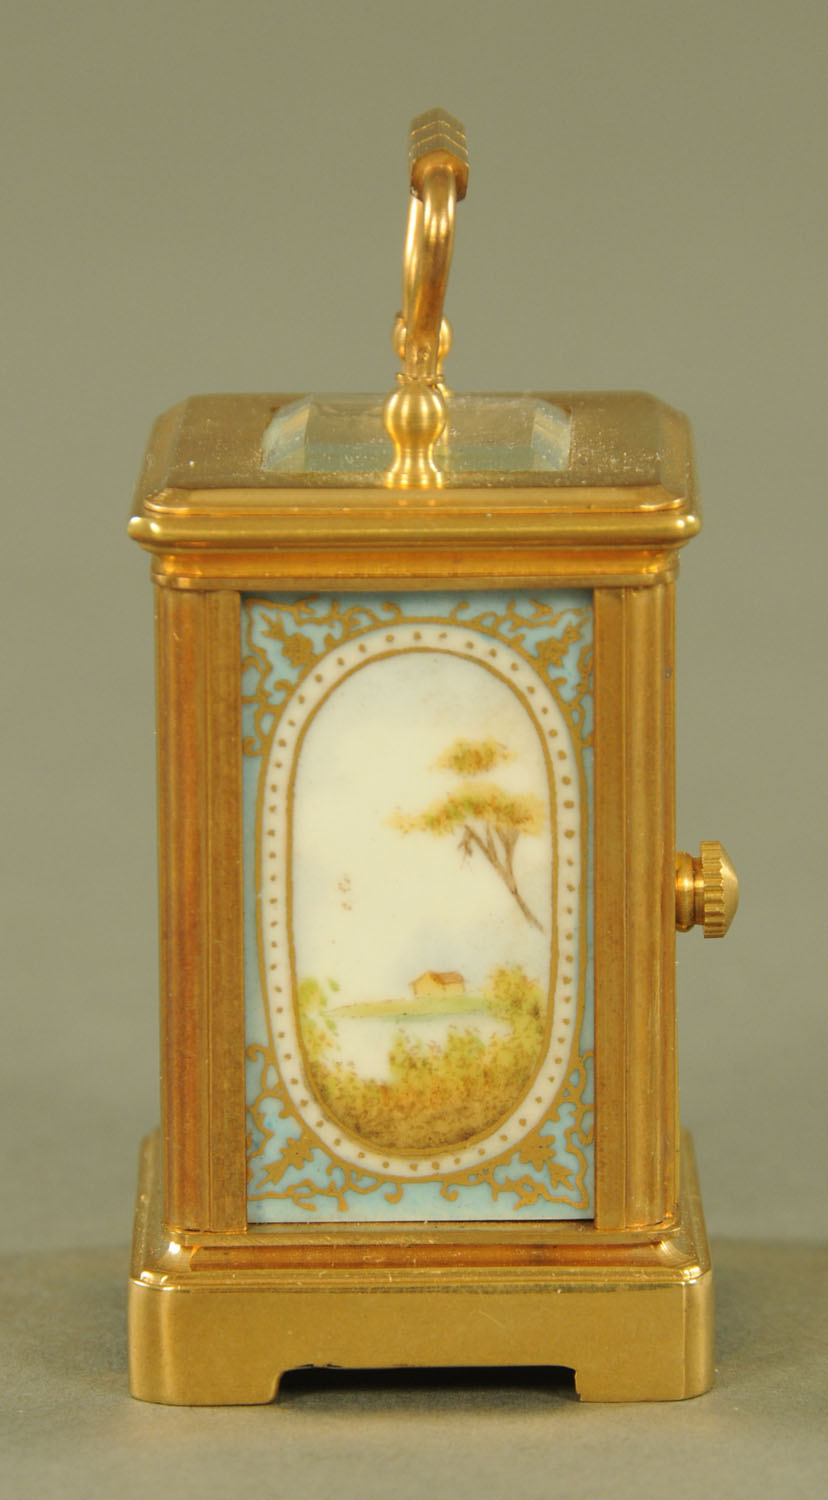 A miniature brass carriage clock, with porcelain panels, timepiece only. - Image 4 of 6